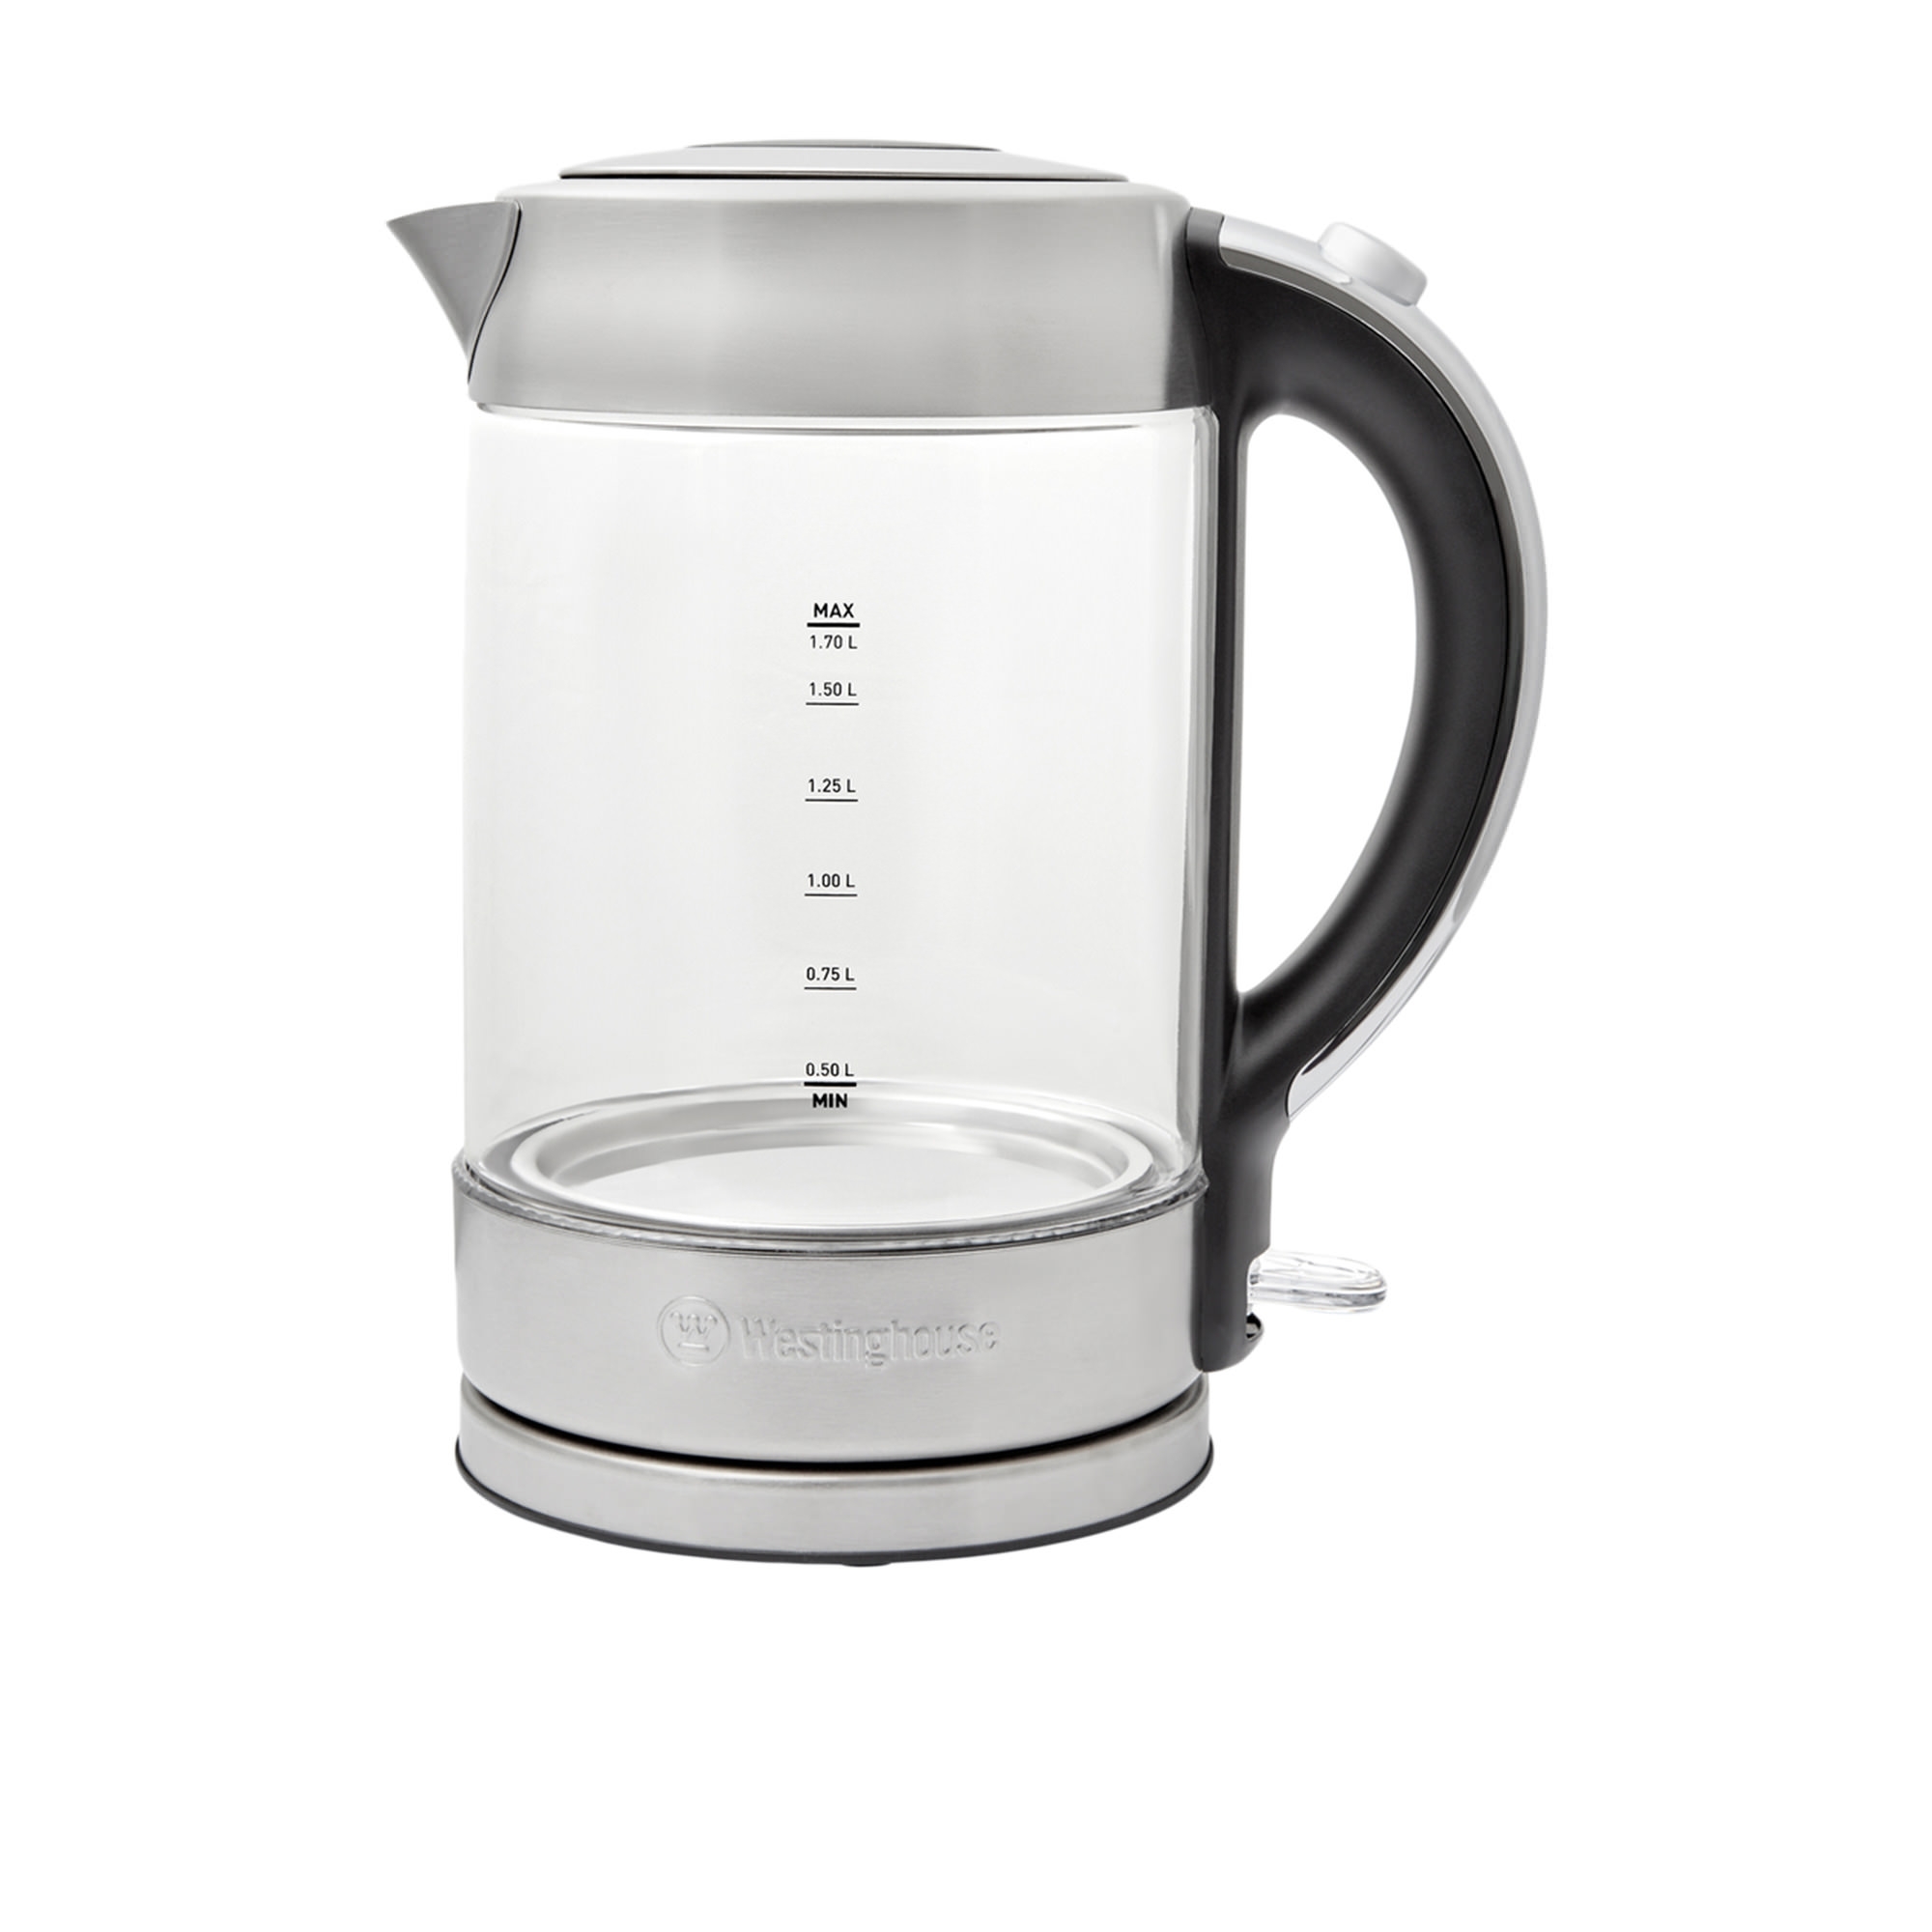 Westinghouse Deluxe Glass Kettle 1.7L Image 1